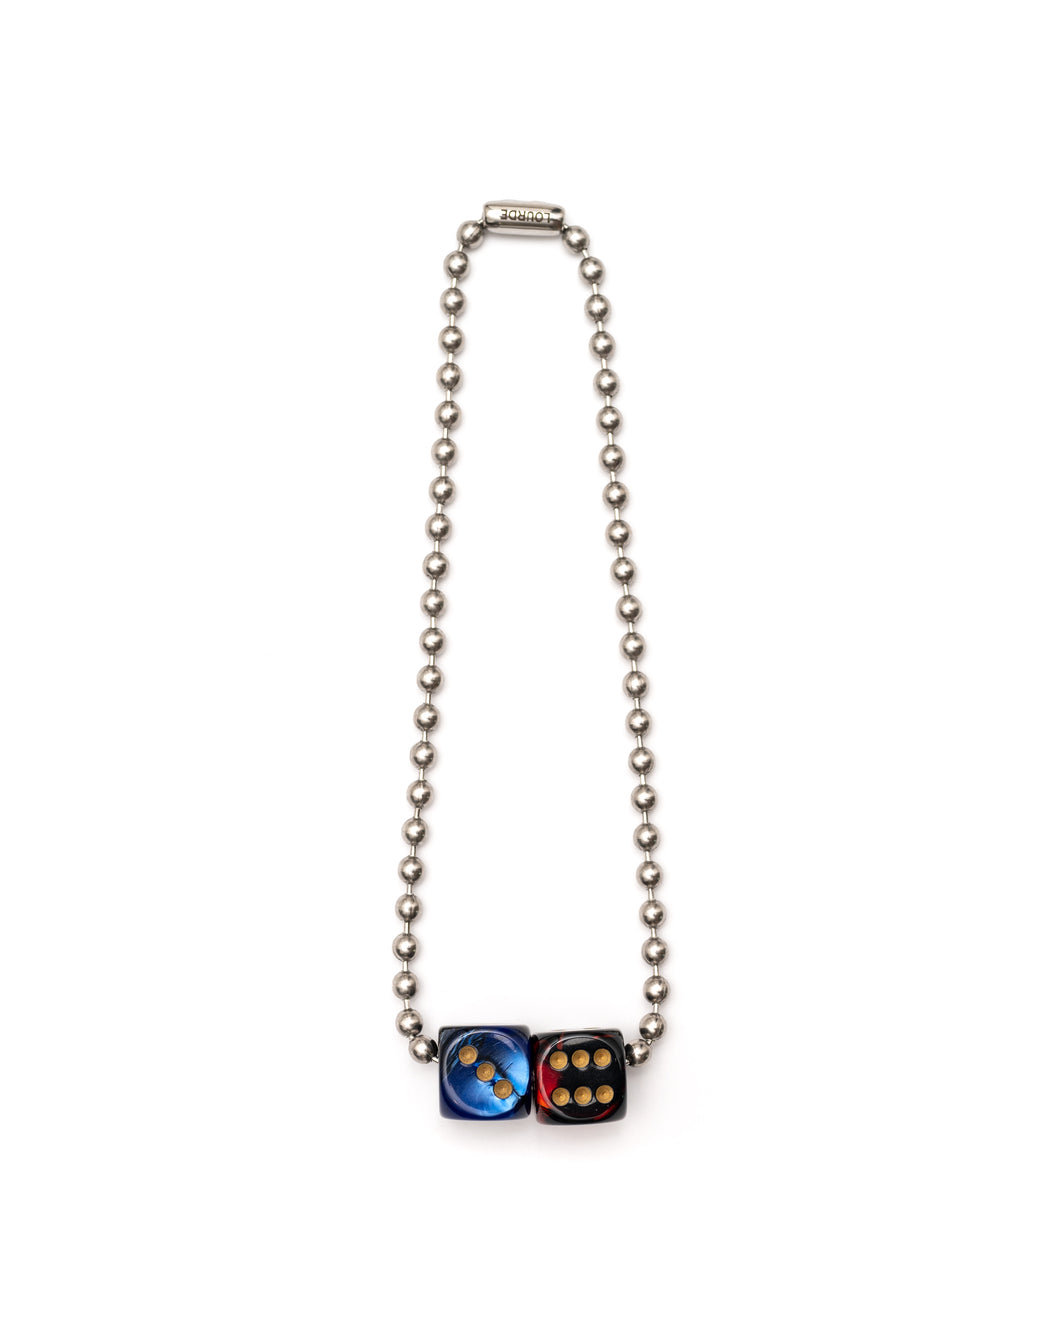 LOURDE CHUNKY DICE CHAIN -  BLUE RED BLACK